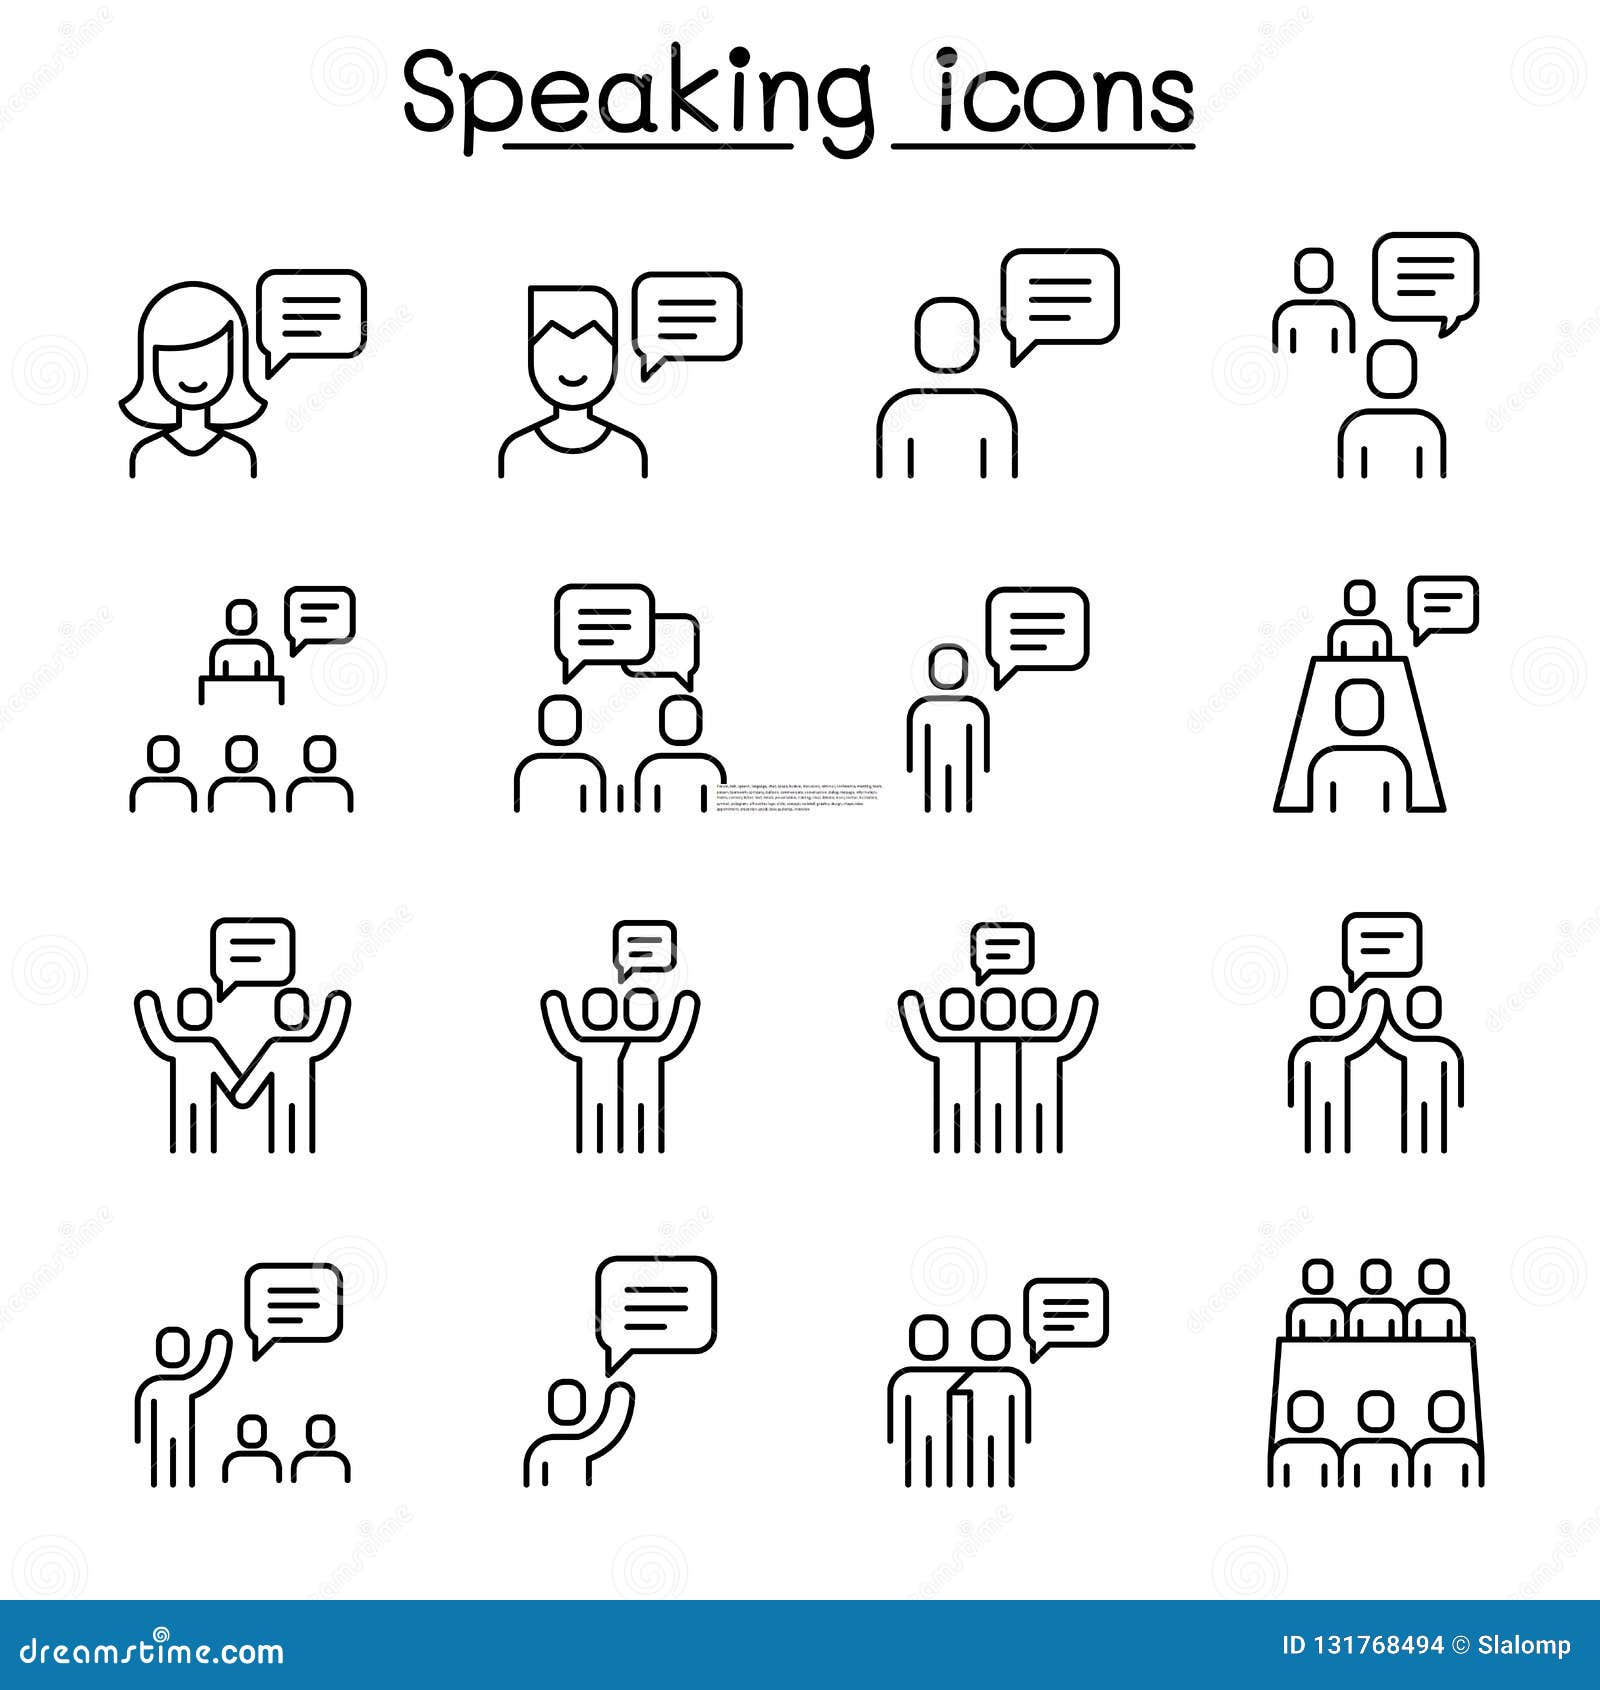 talk, speech, discussion, dialog, speaking, chat, conference, meeting icon set in thin line style